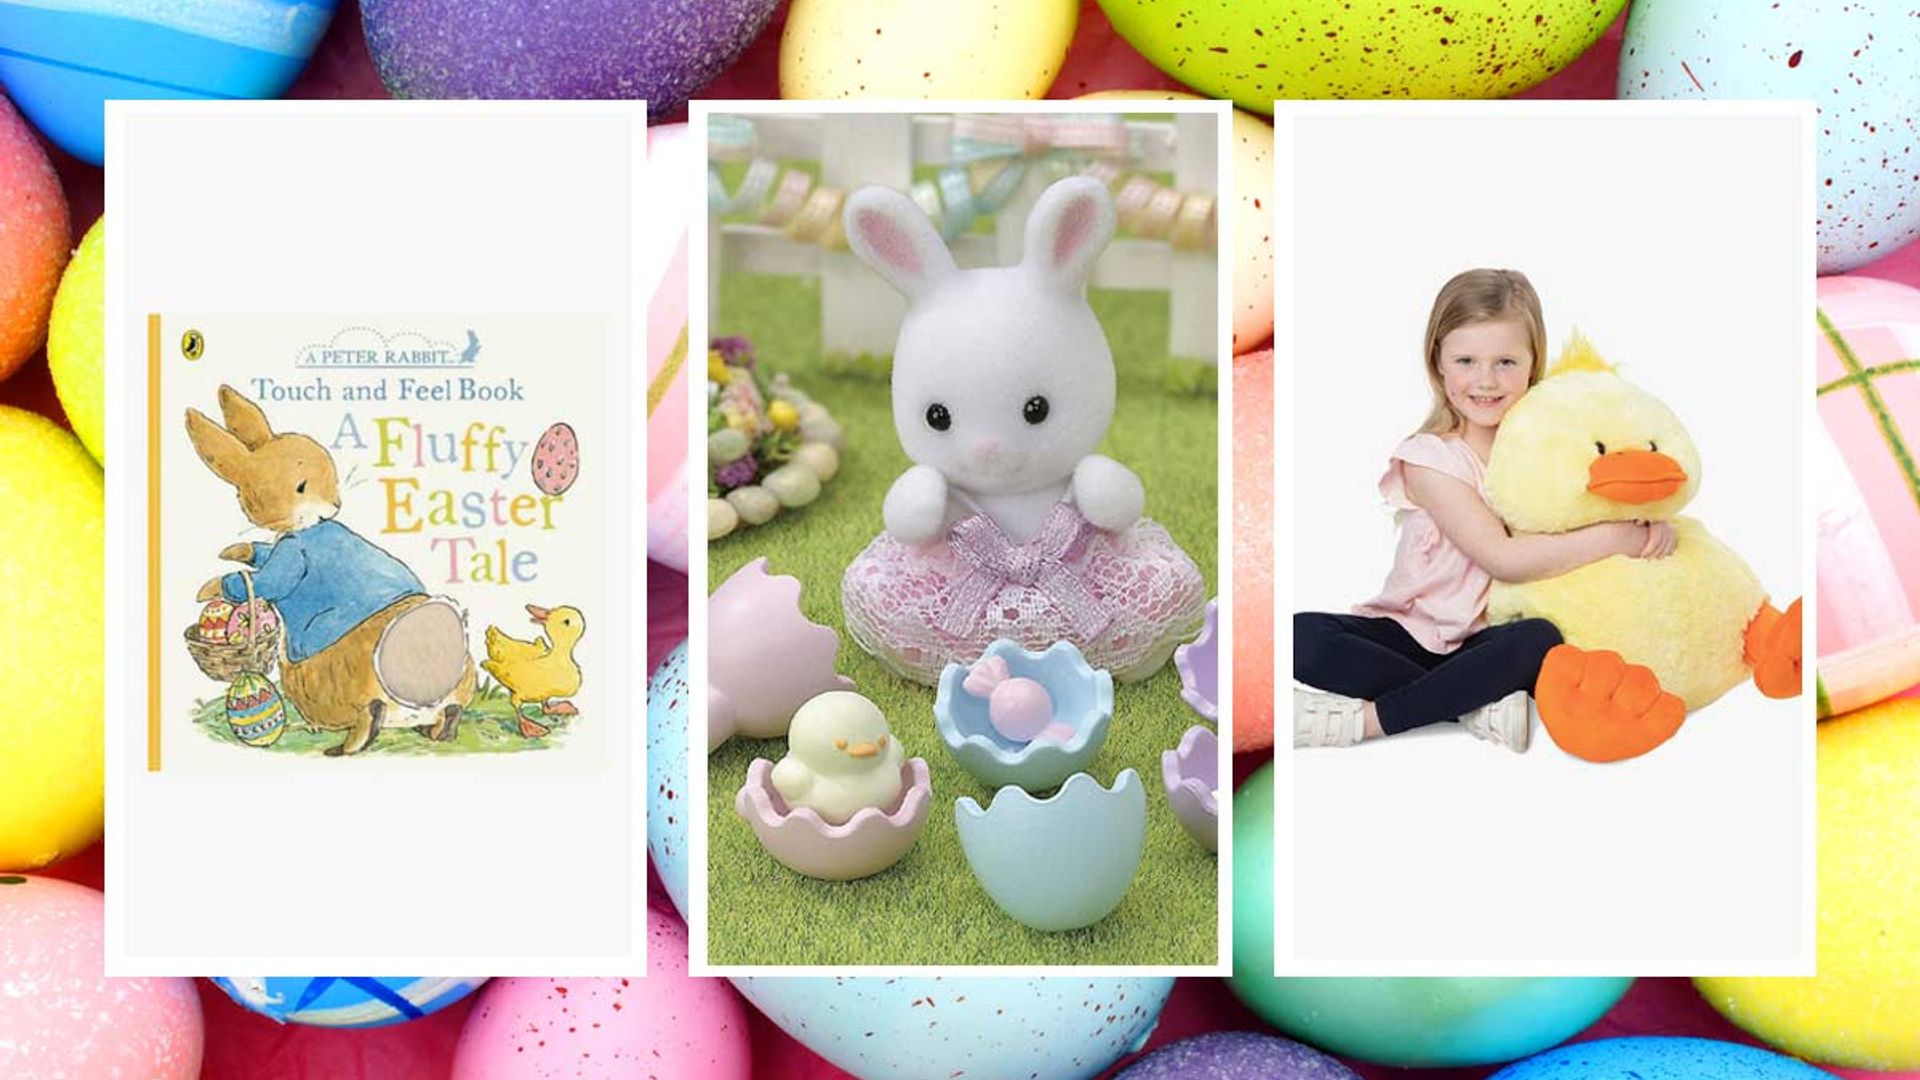 22 Best Easter gifts for kids that you can give instead of chocolate - and some for adults too!